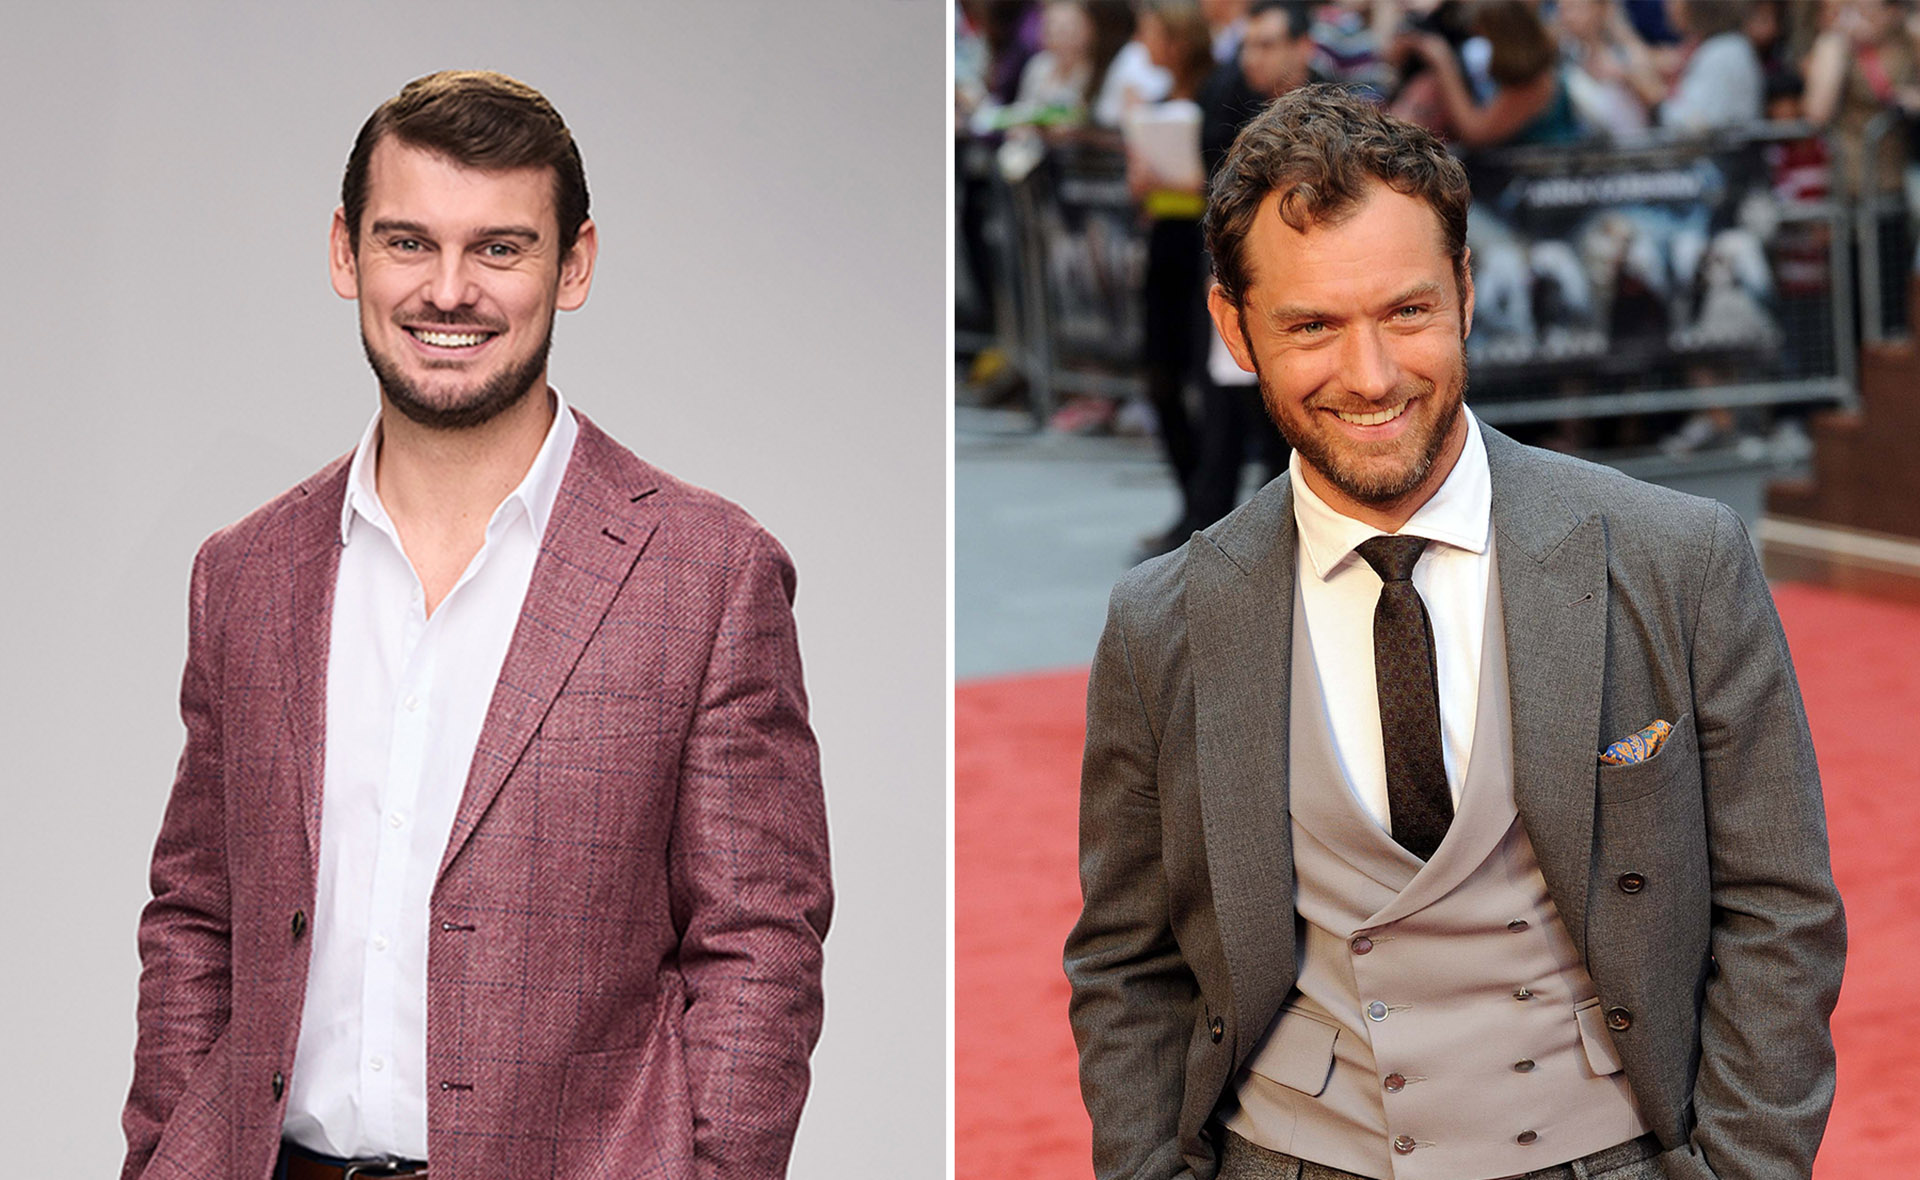 EXCLUSIVE: Proof that Love Triangle’s Jude Law lookalike, Alex, has been on TV before